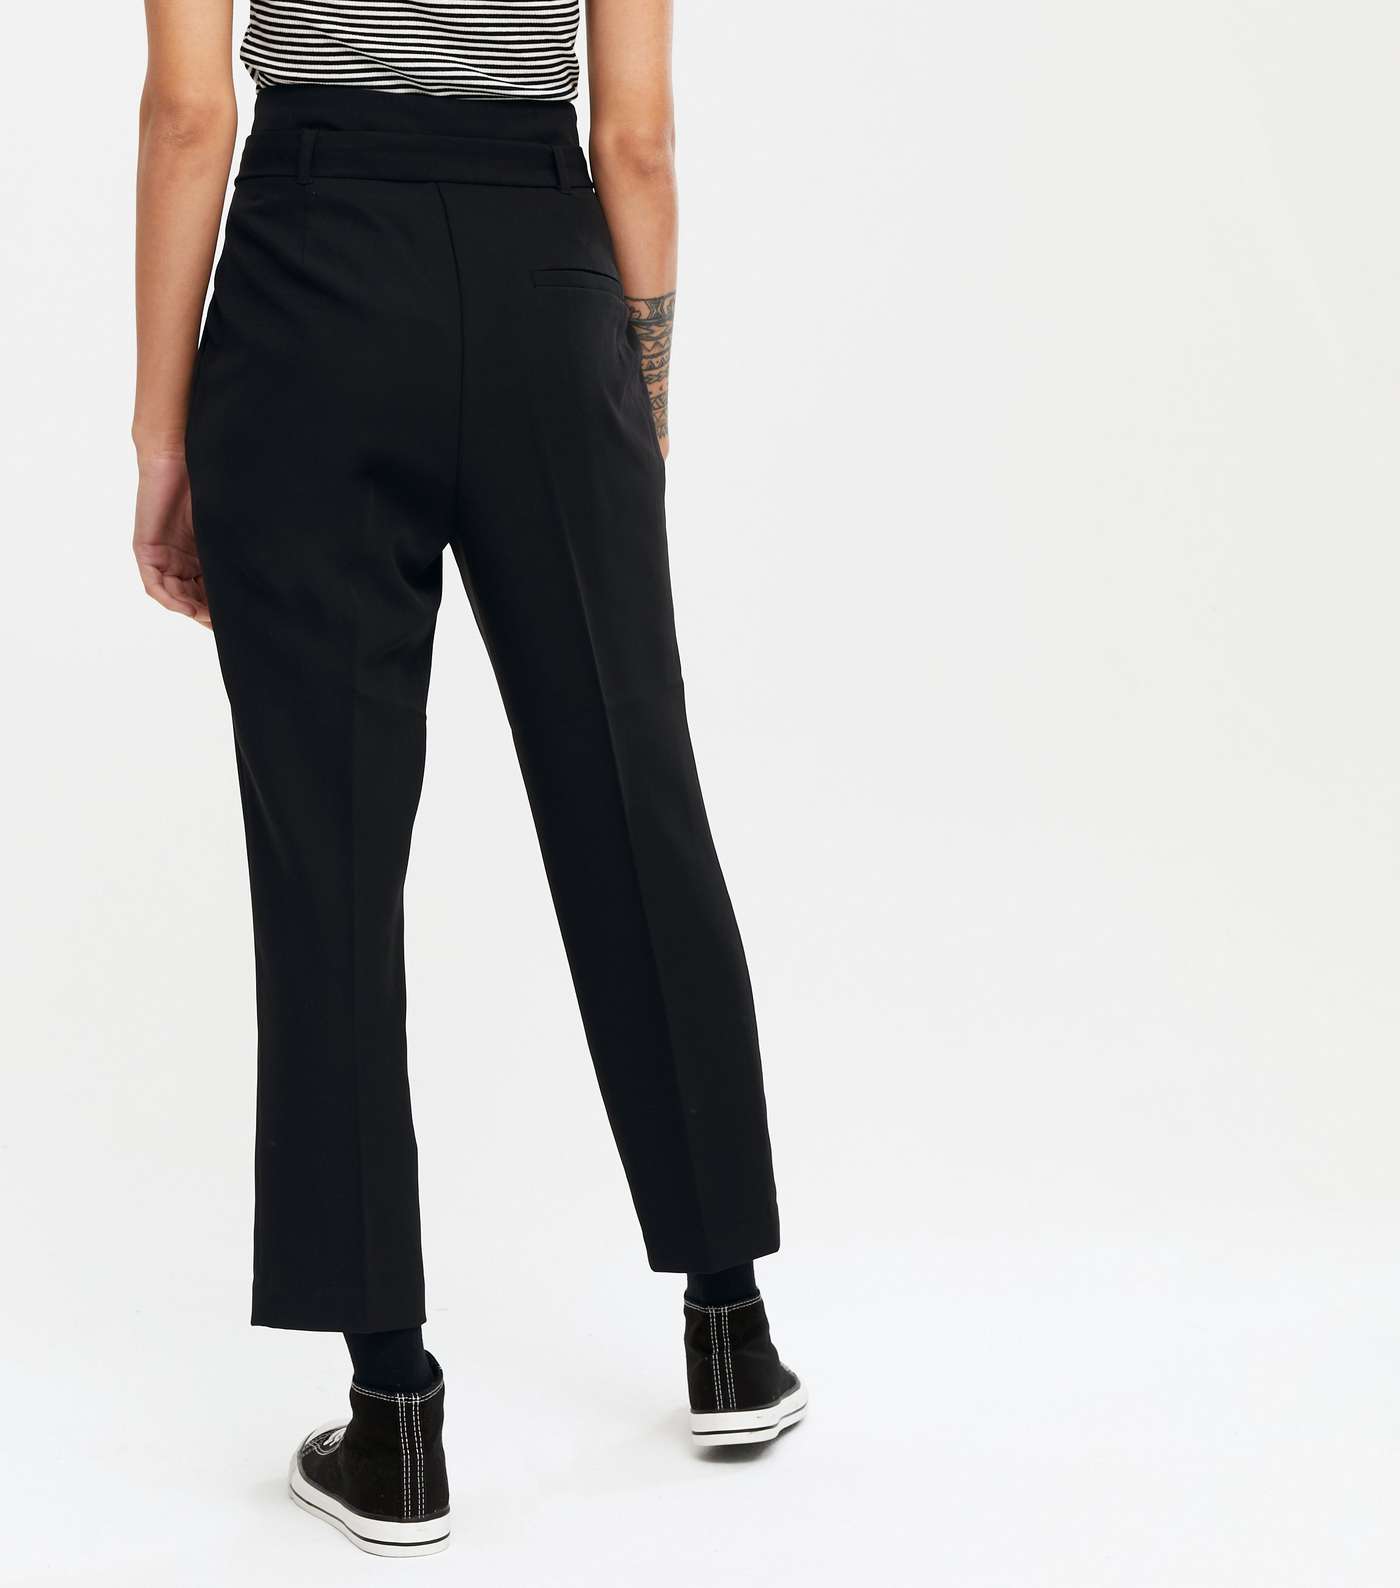 Petite Black Belted High Waist Trousers Image 3